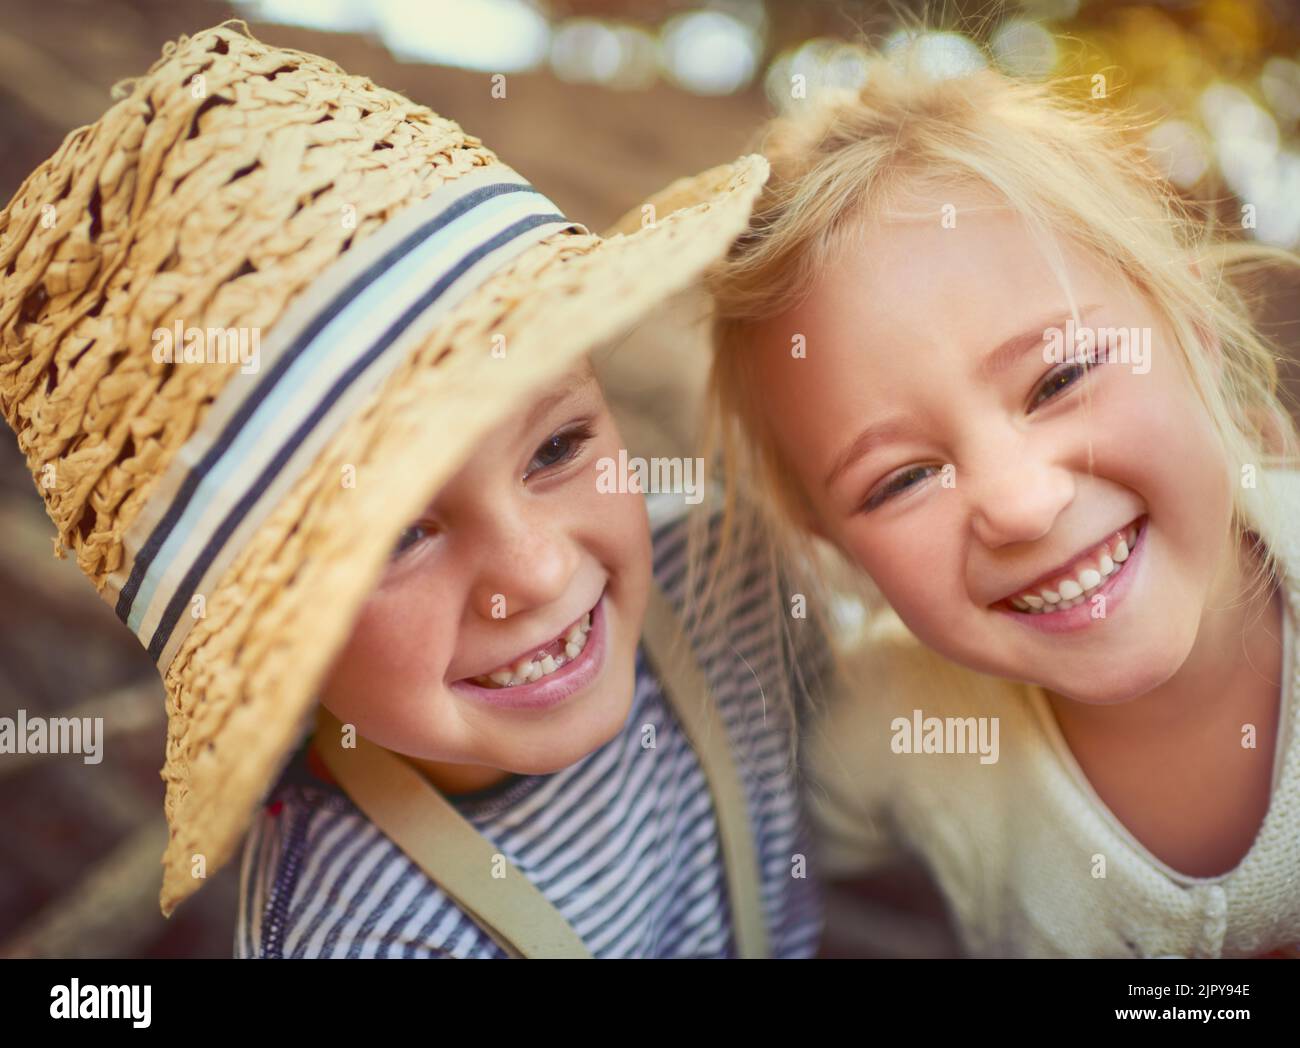 Cute and carefree as can be. Portrait of two little children playing together outdoors. Stock Photo